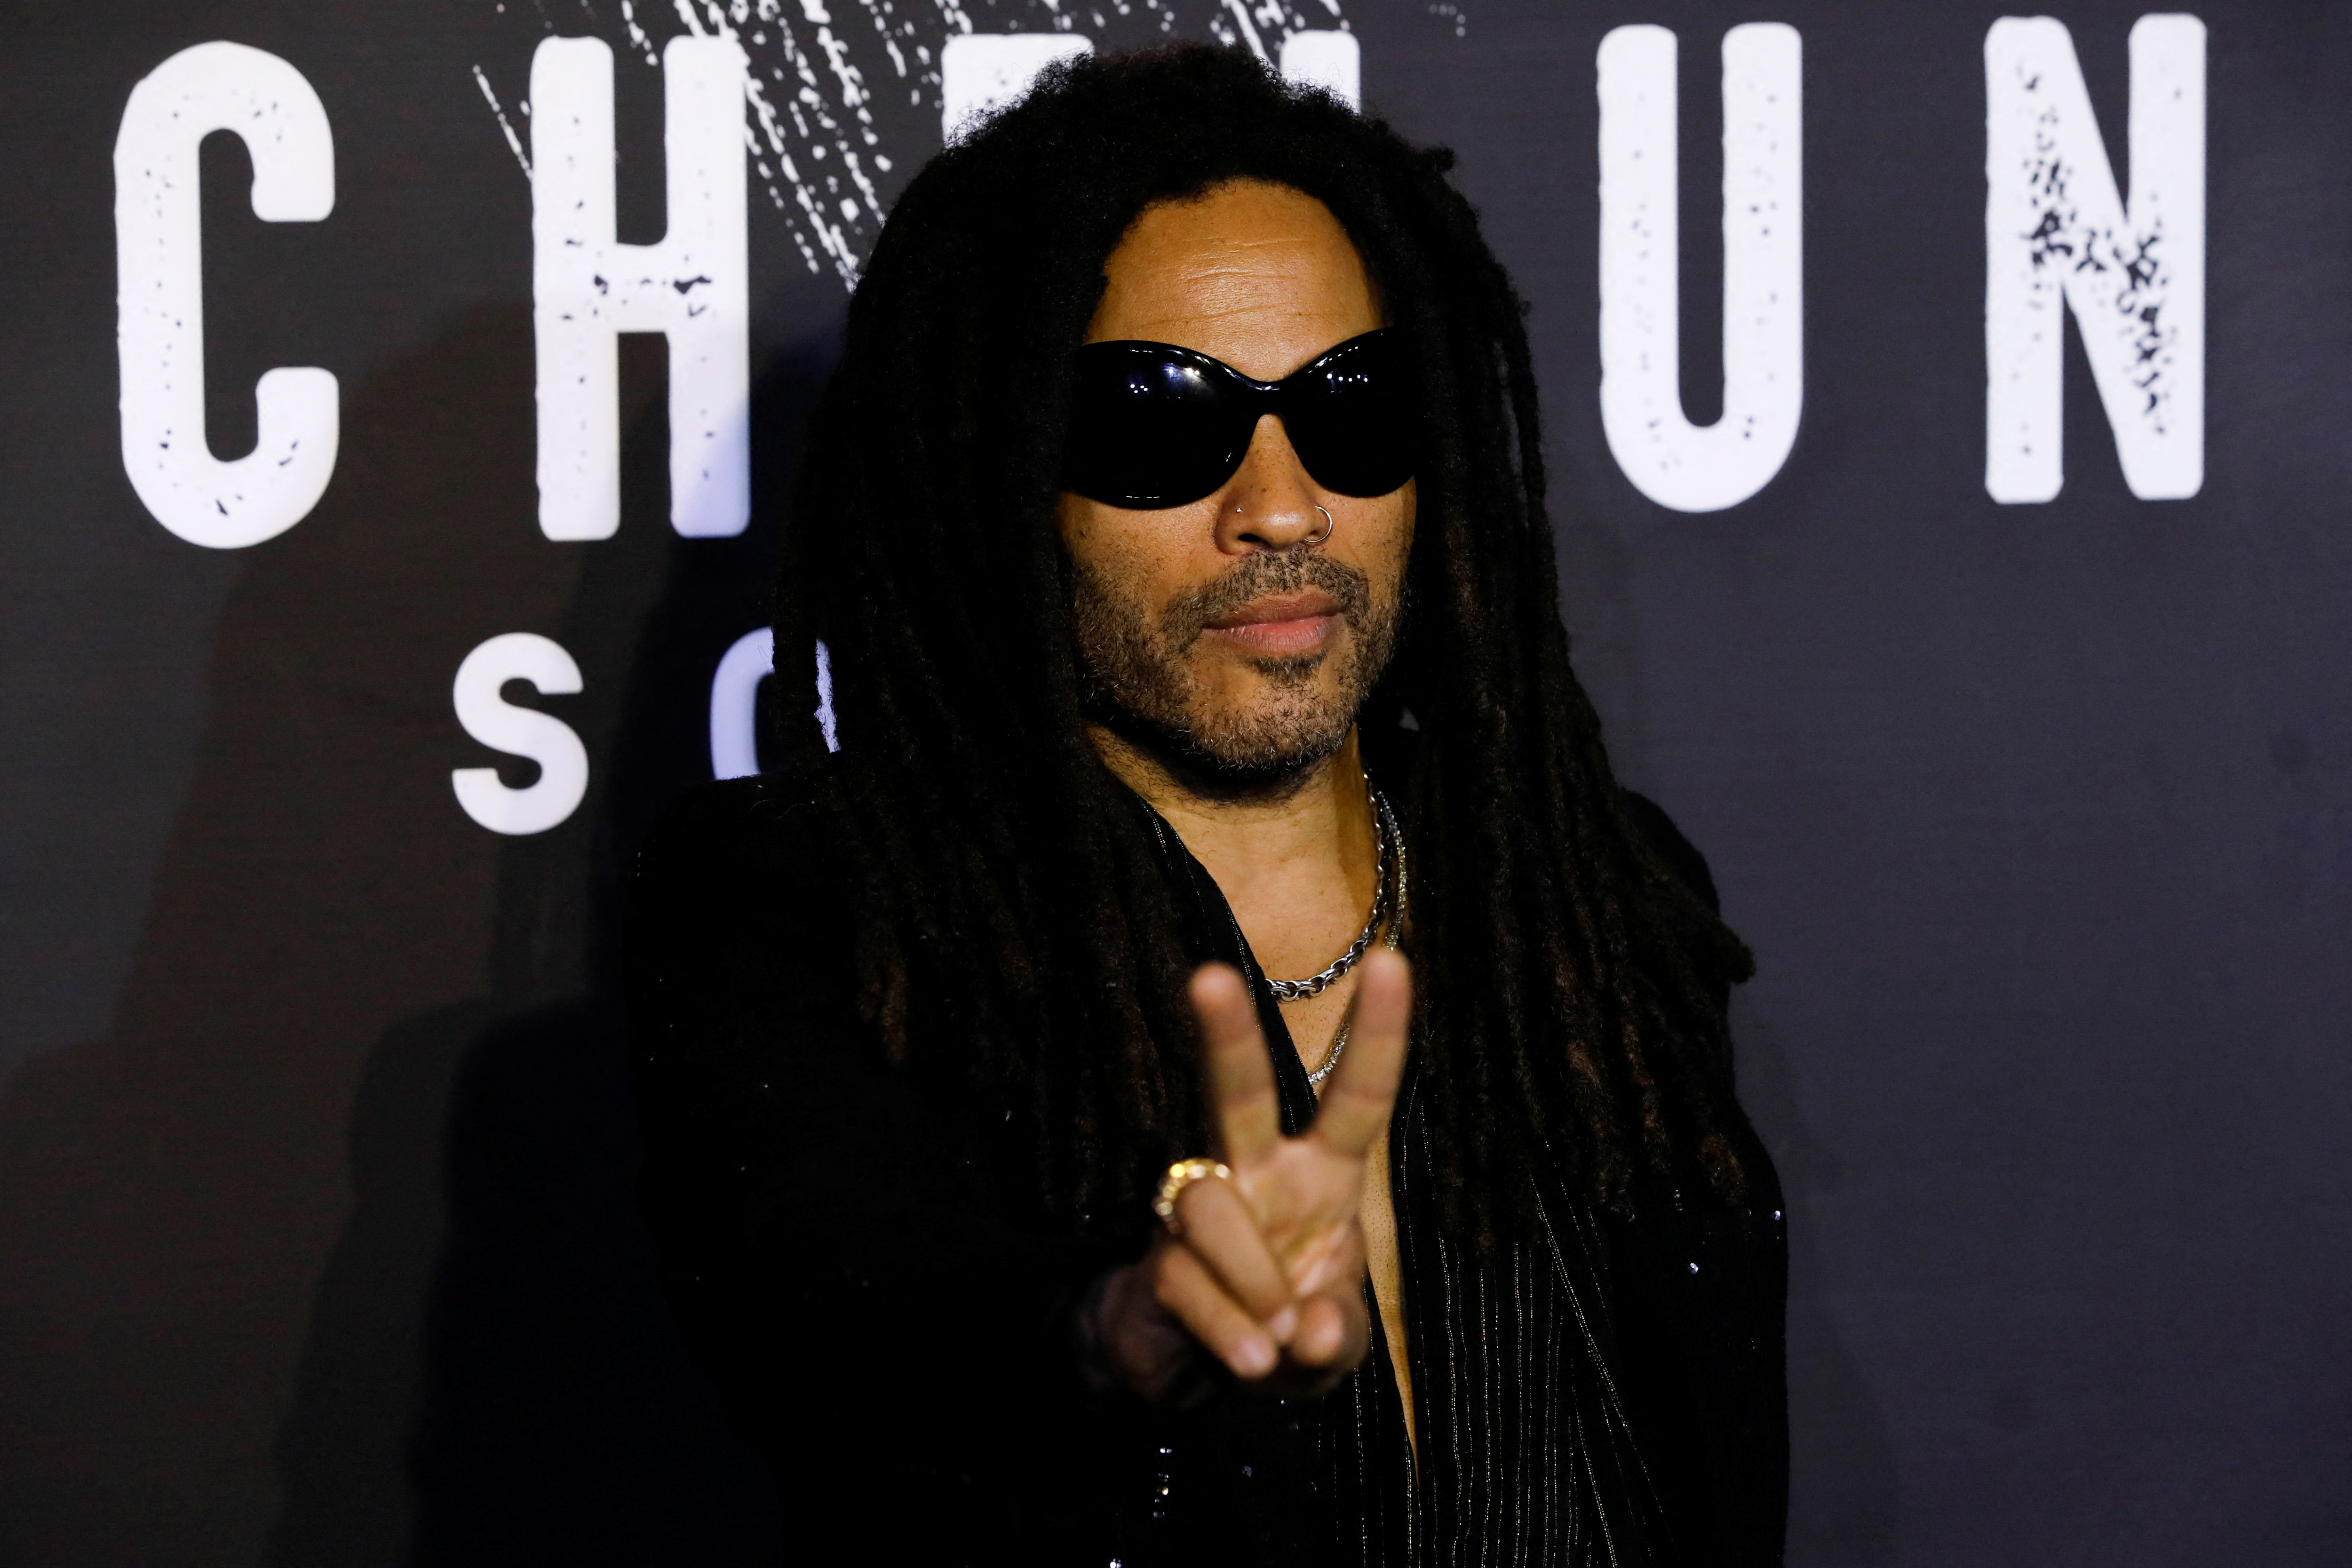 Musician Lenny Kravitz attends the launch event for his sotol liquor brand in Mexico City, Mexico October 24, 2022. REUTERS/Raquel Cunha